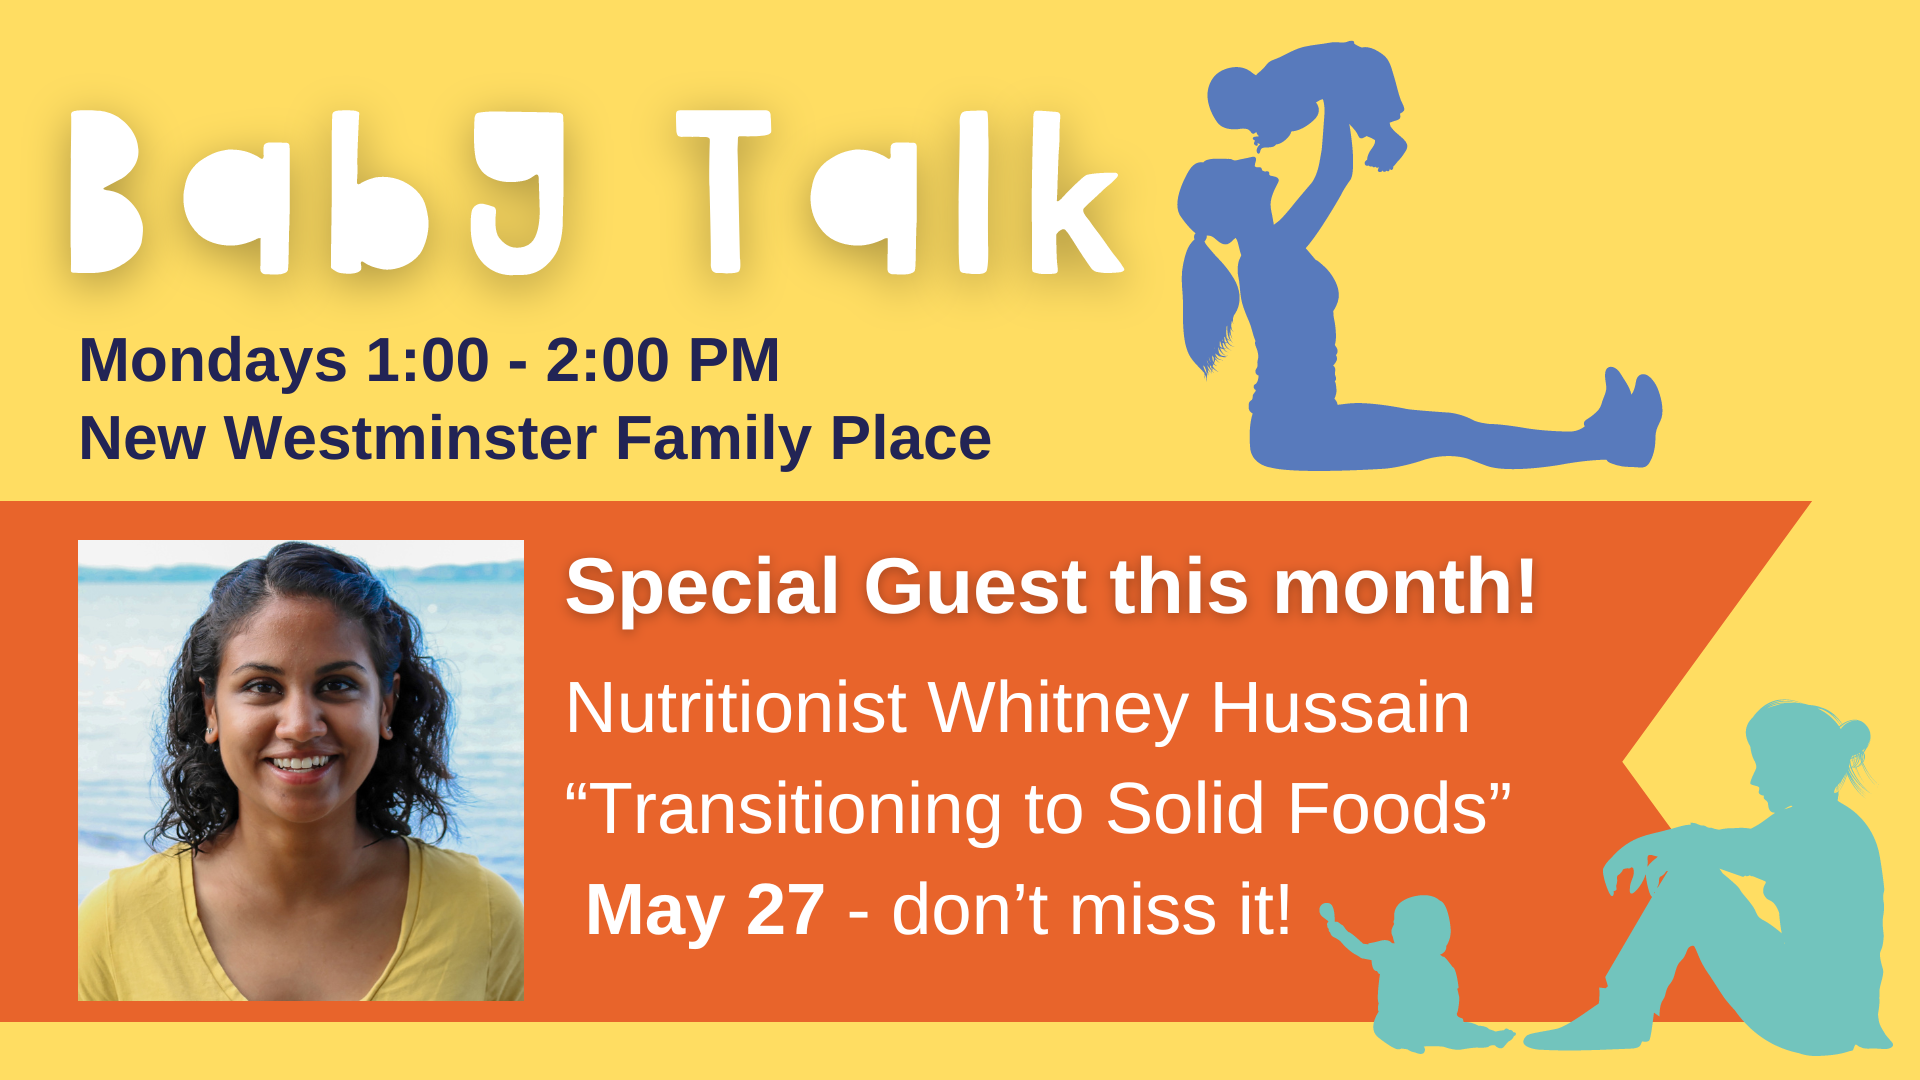 Colourful image featuring a photo of Whitney Hussain, Nutritionist as special guest this month